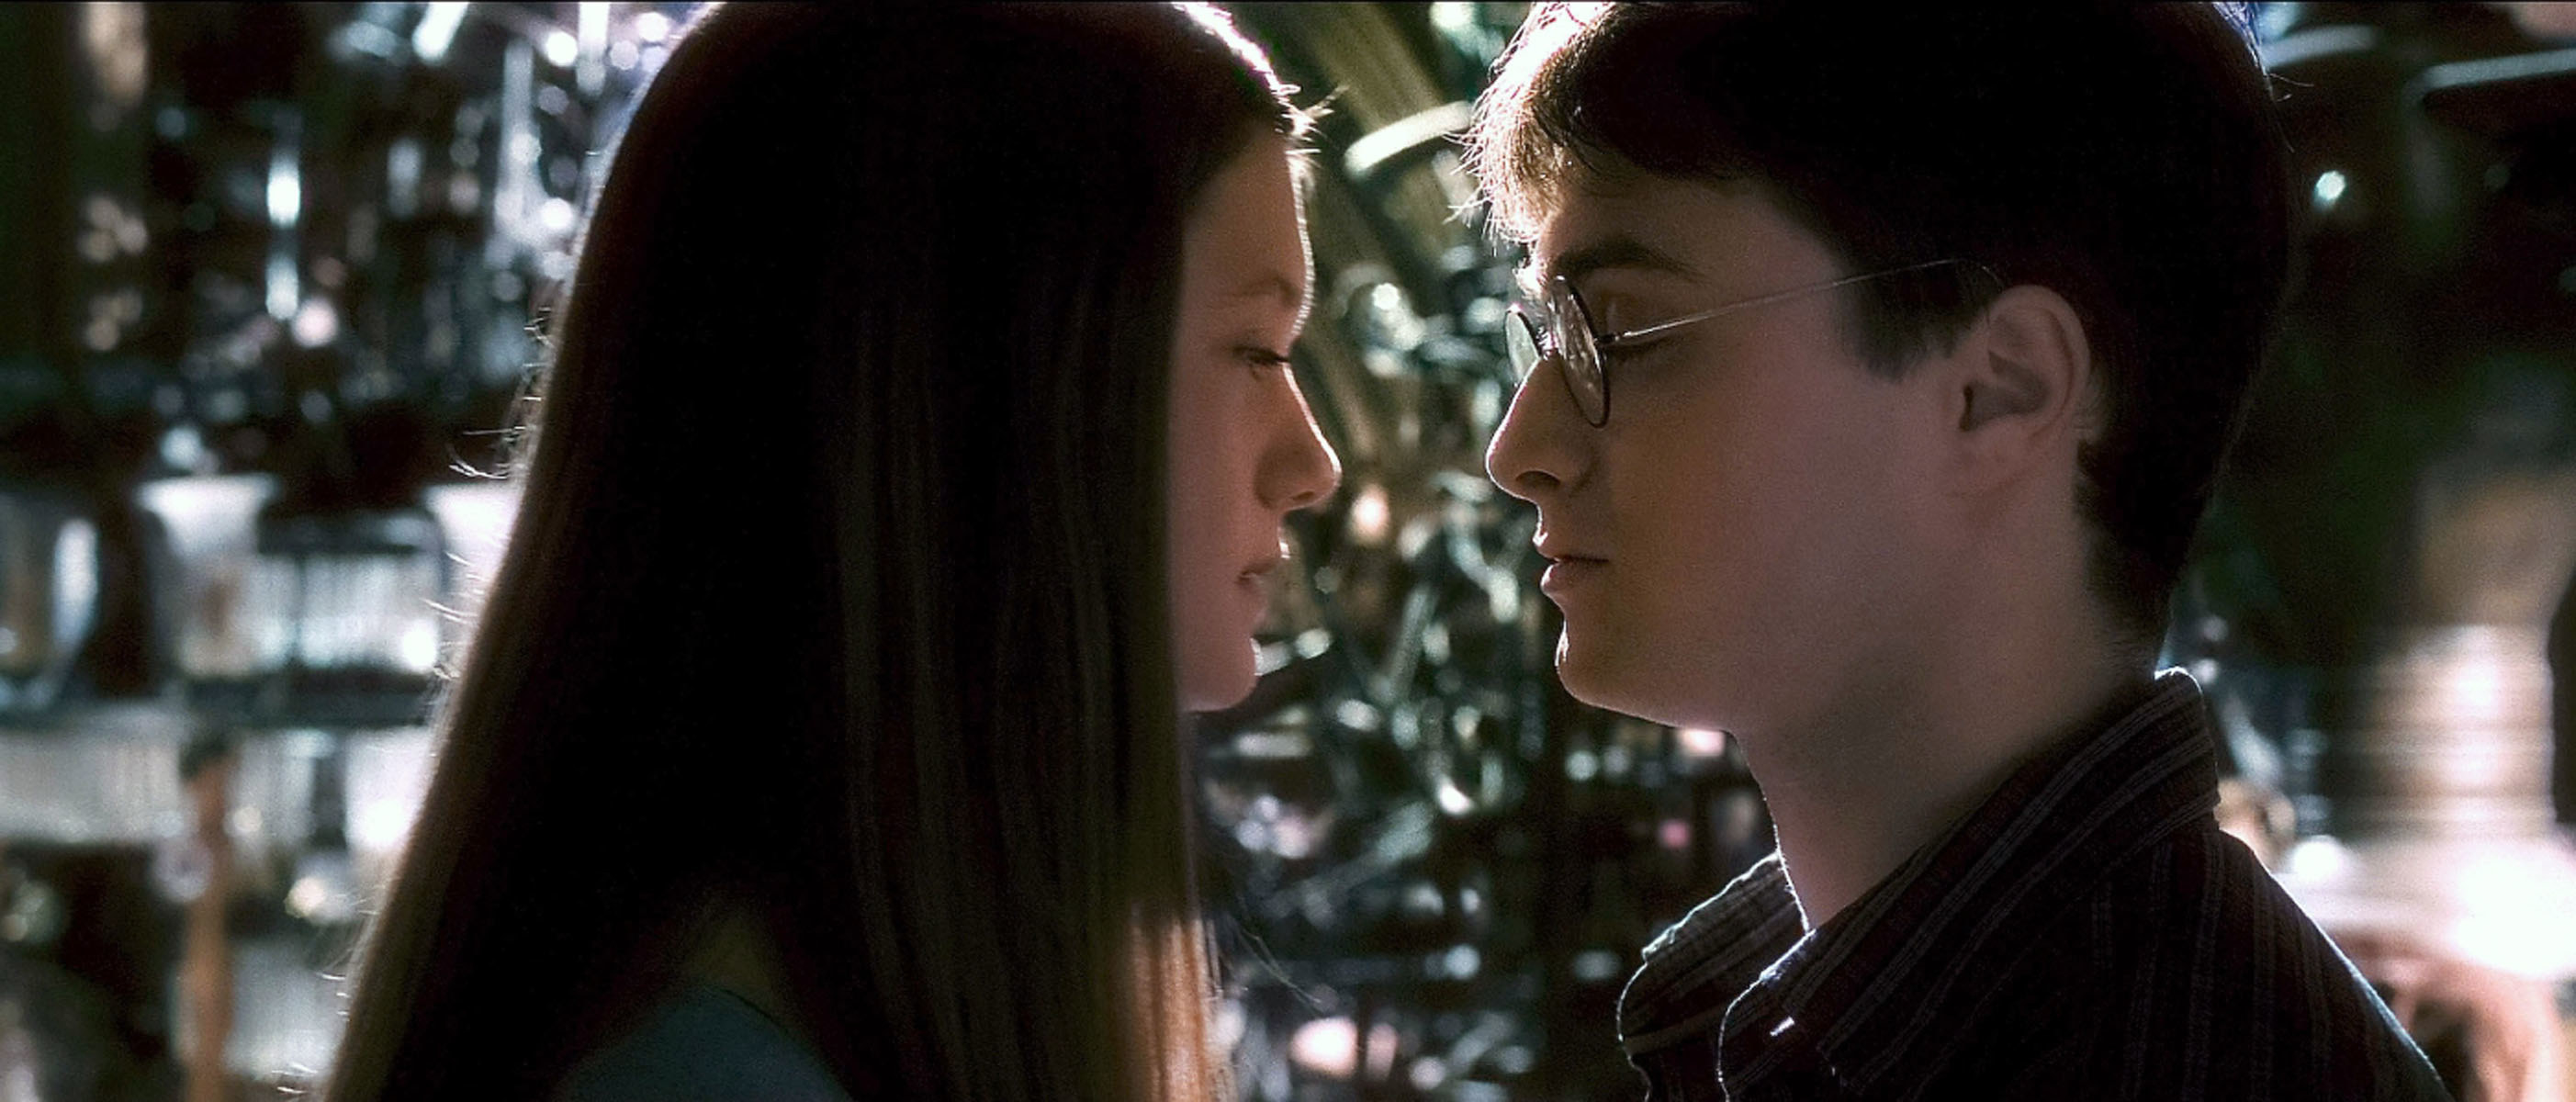 Bonnie Wright and Daniel Radcliffe about to kiss in the Room of Requirement